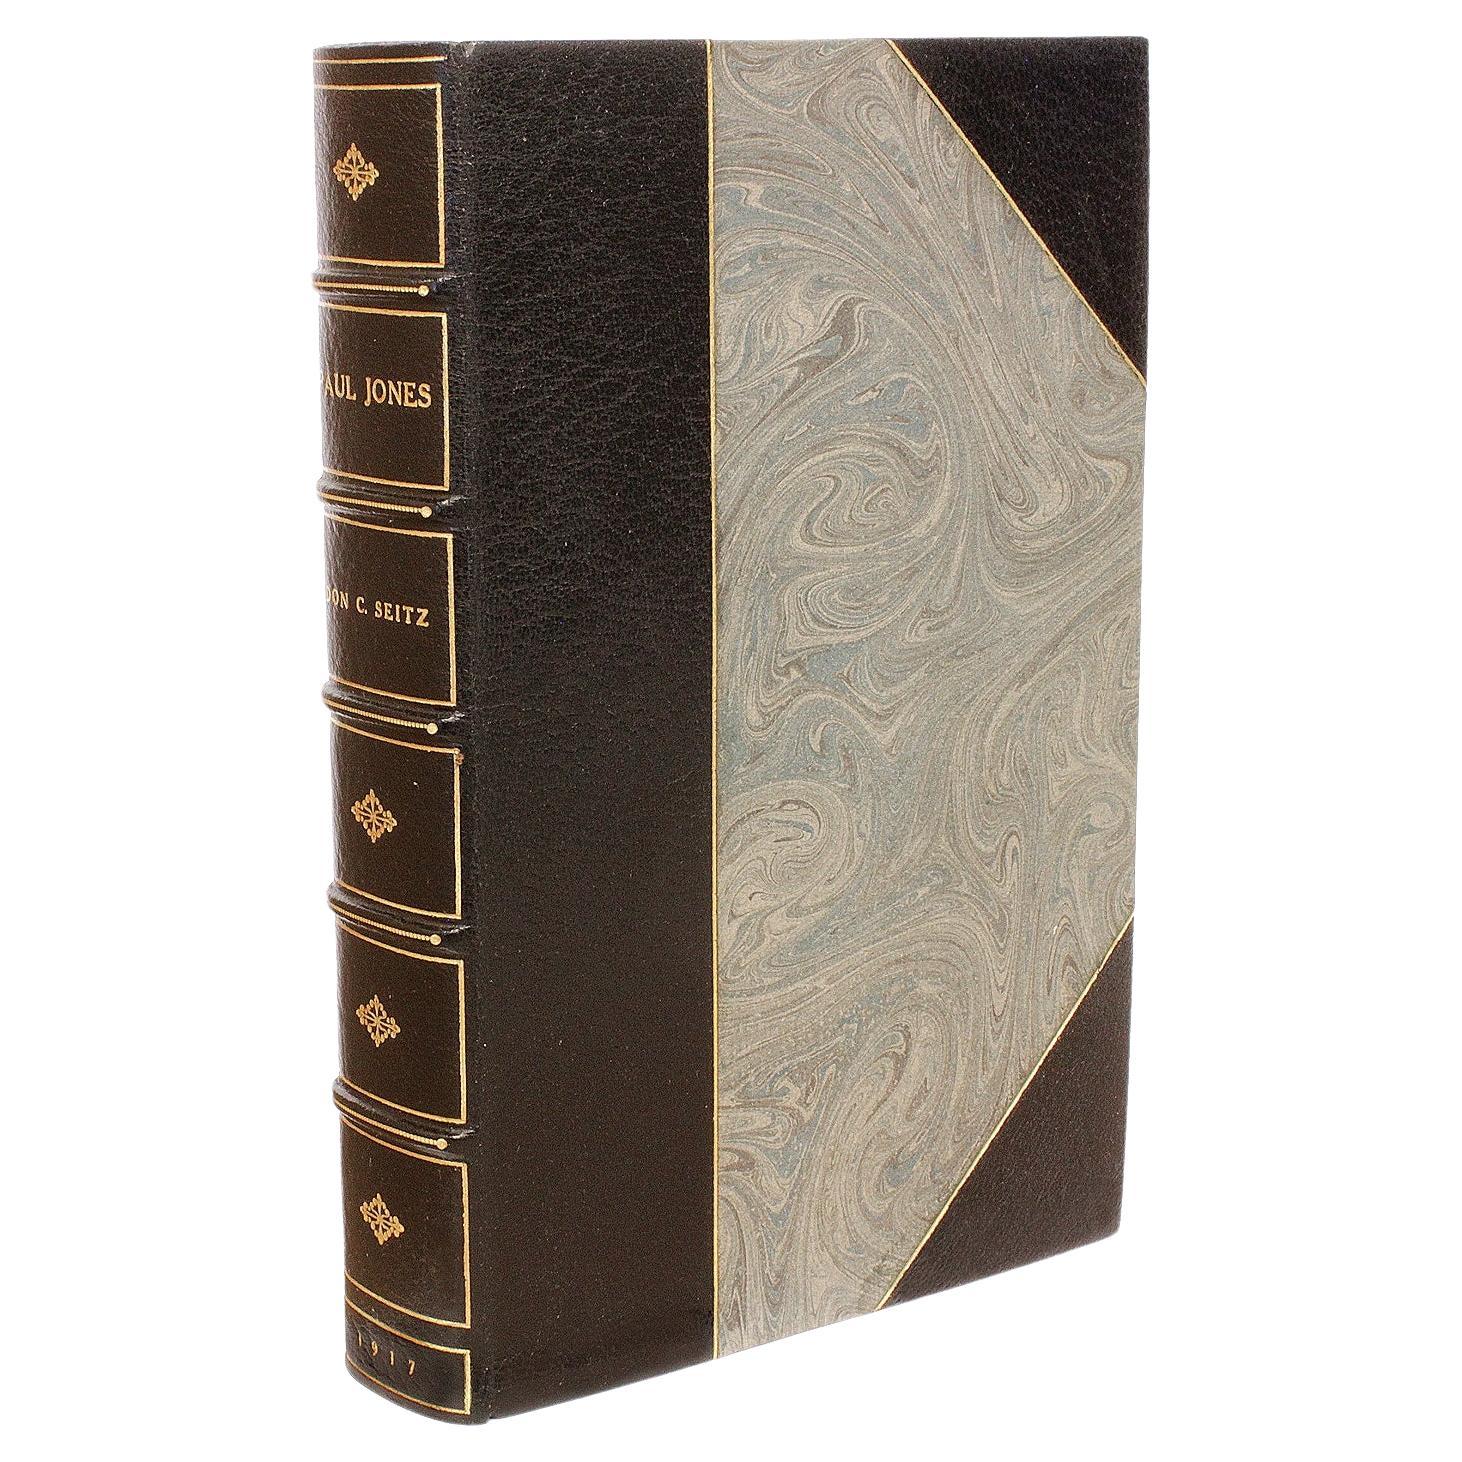 SEITZ. Paul Jones, His Exploits In English Seas During 1778-1780. FIRST EDITION For Sale